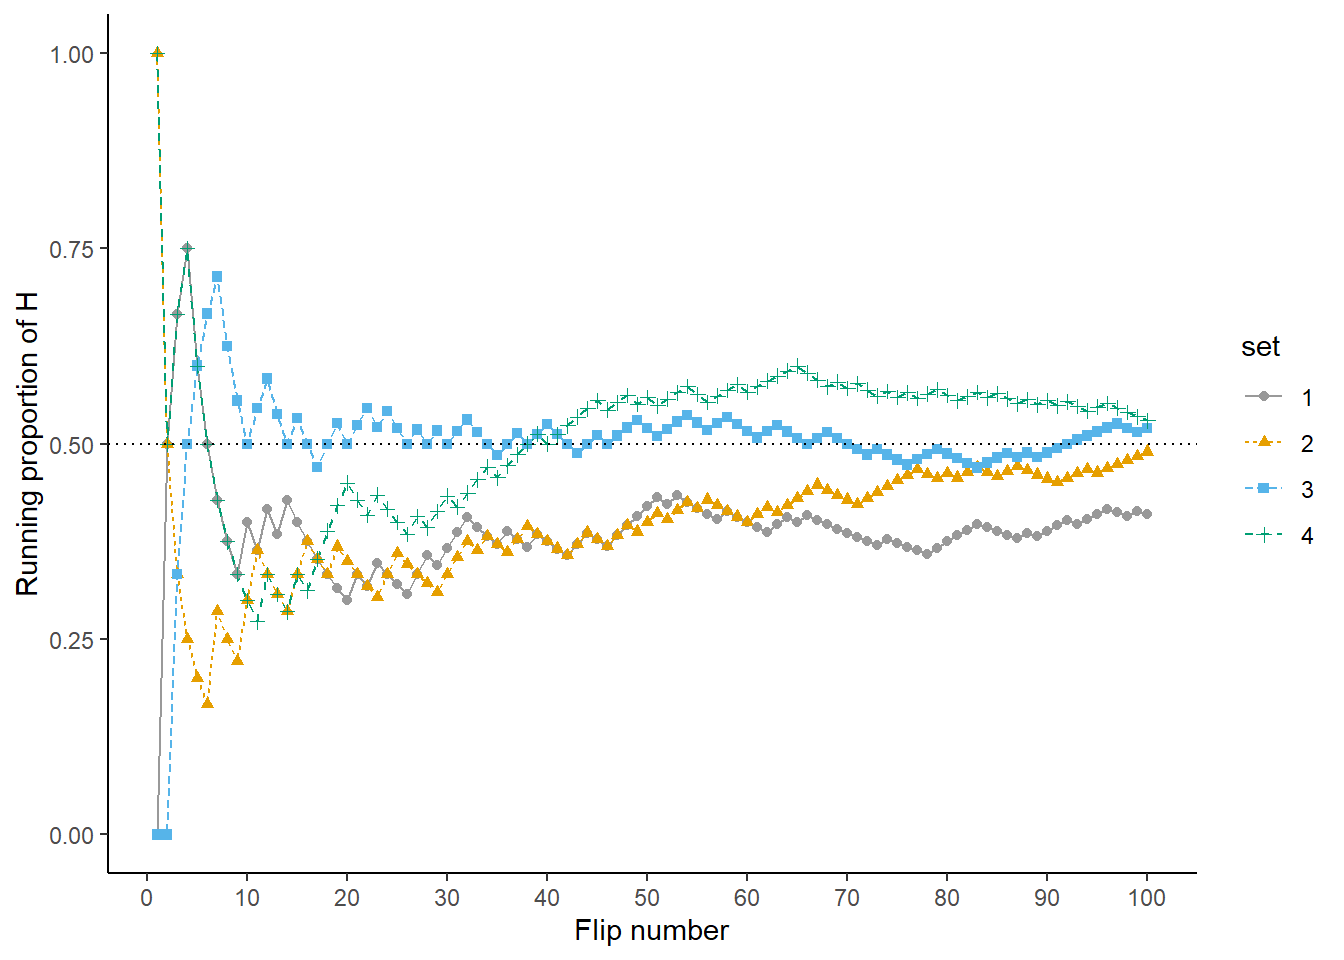 Running proportion of H versus number of flips for four sets of 100 coin flips.